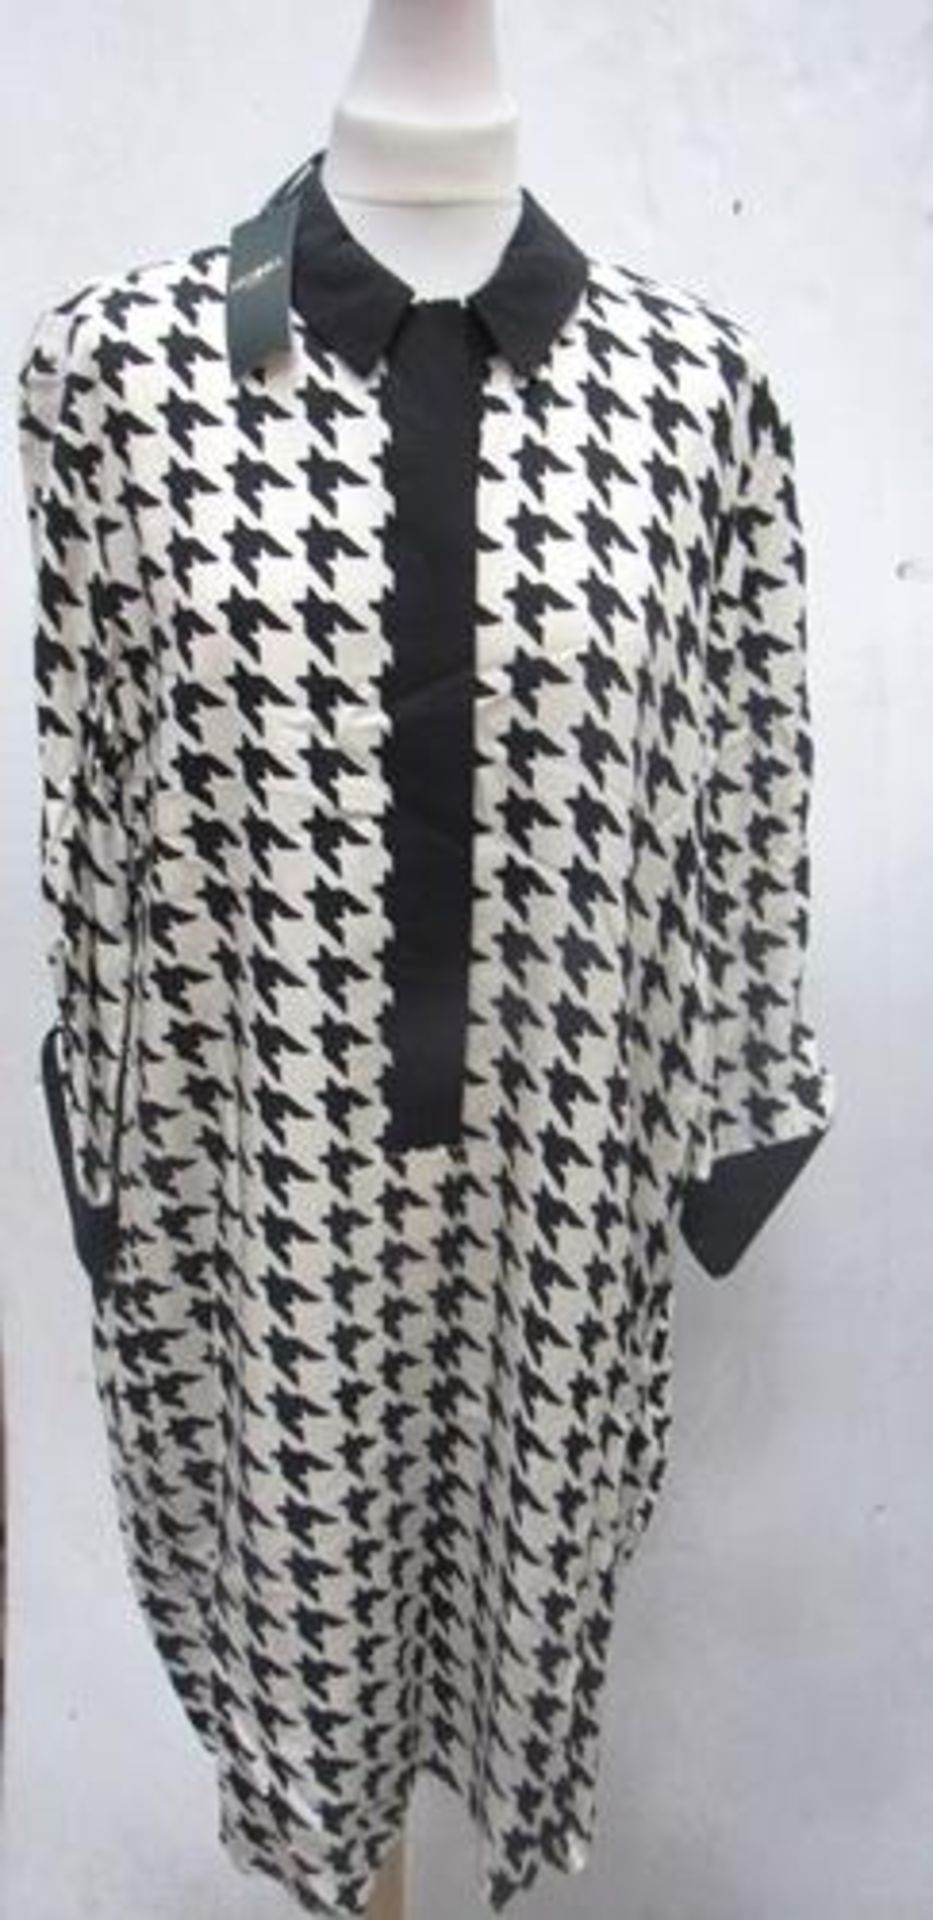 2 x Hobbs dresses comprising 1 x Eliza shirt dress, size 14 and 1 x Marci dress, size 18 - New ( - Image 2 of 2